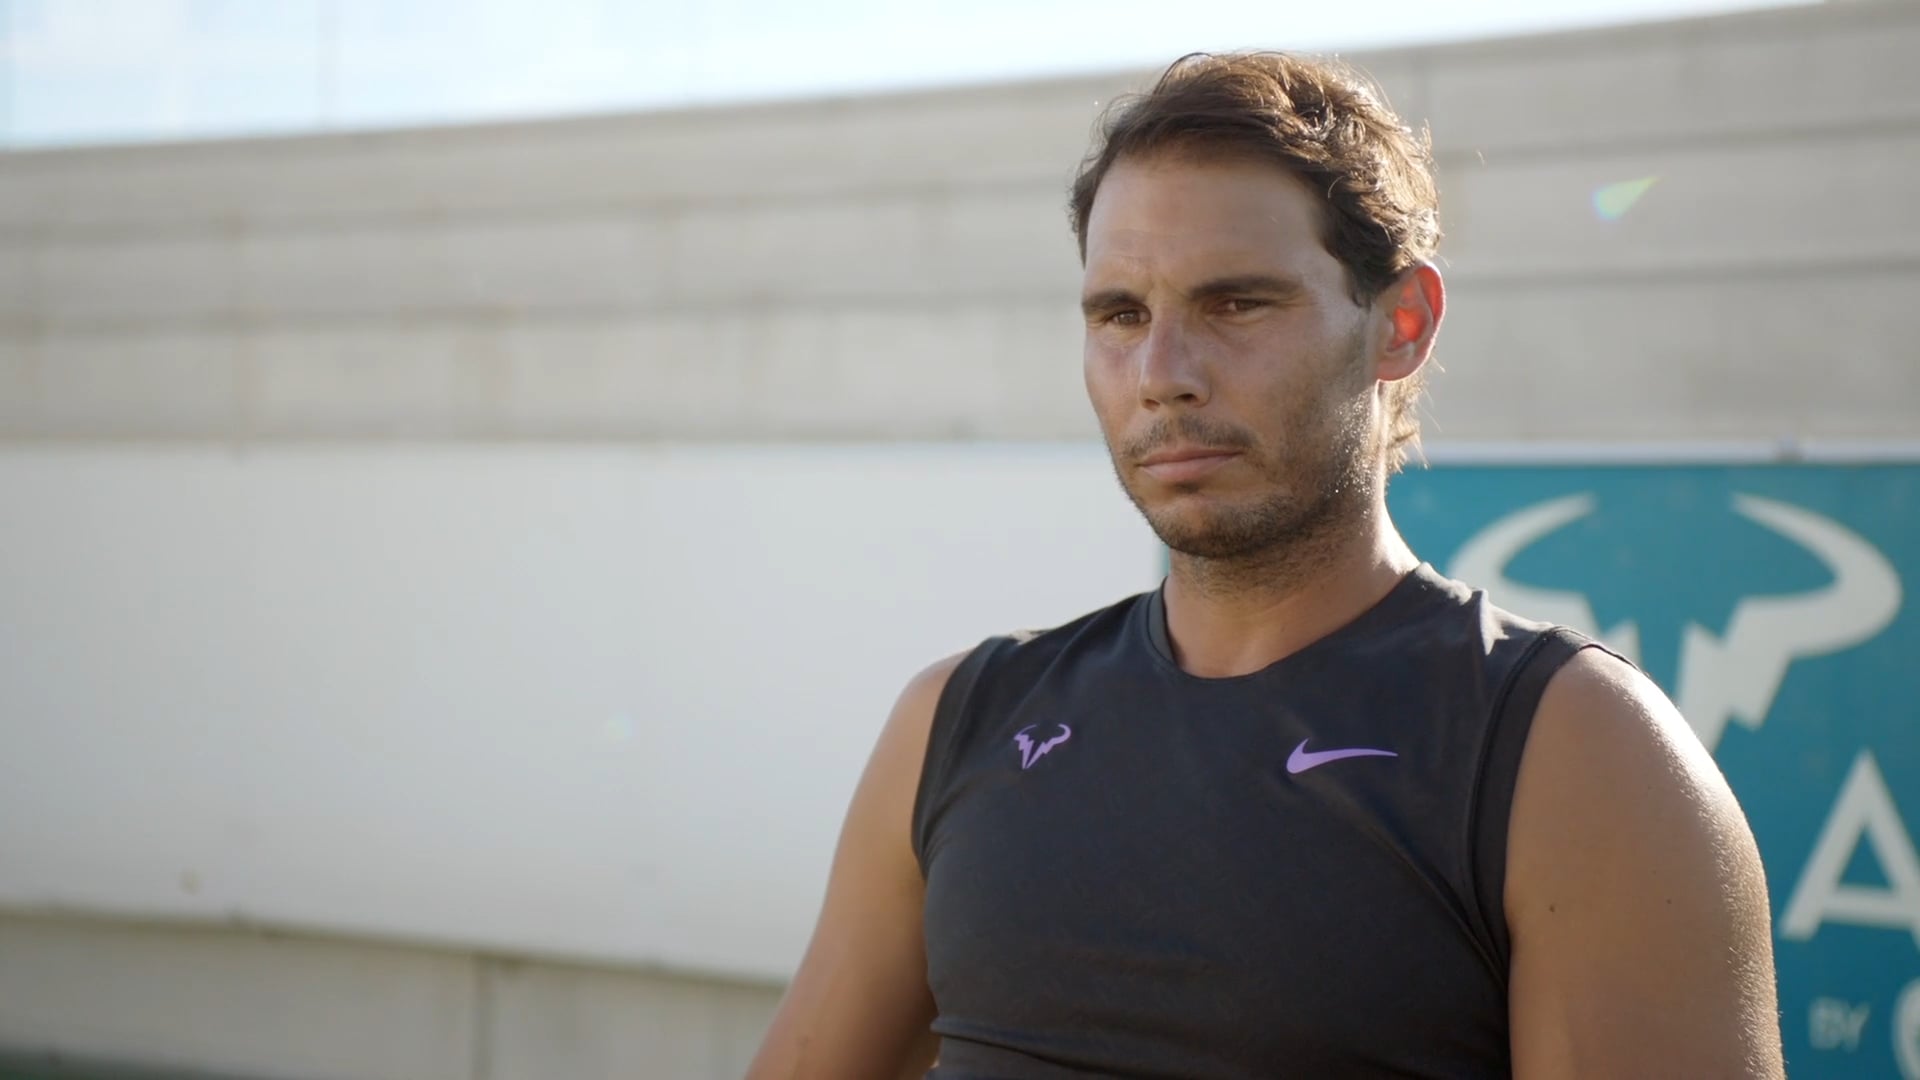 Nike - Nadal - Birthplace of Dreams on Vimeo